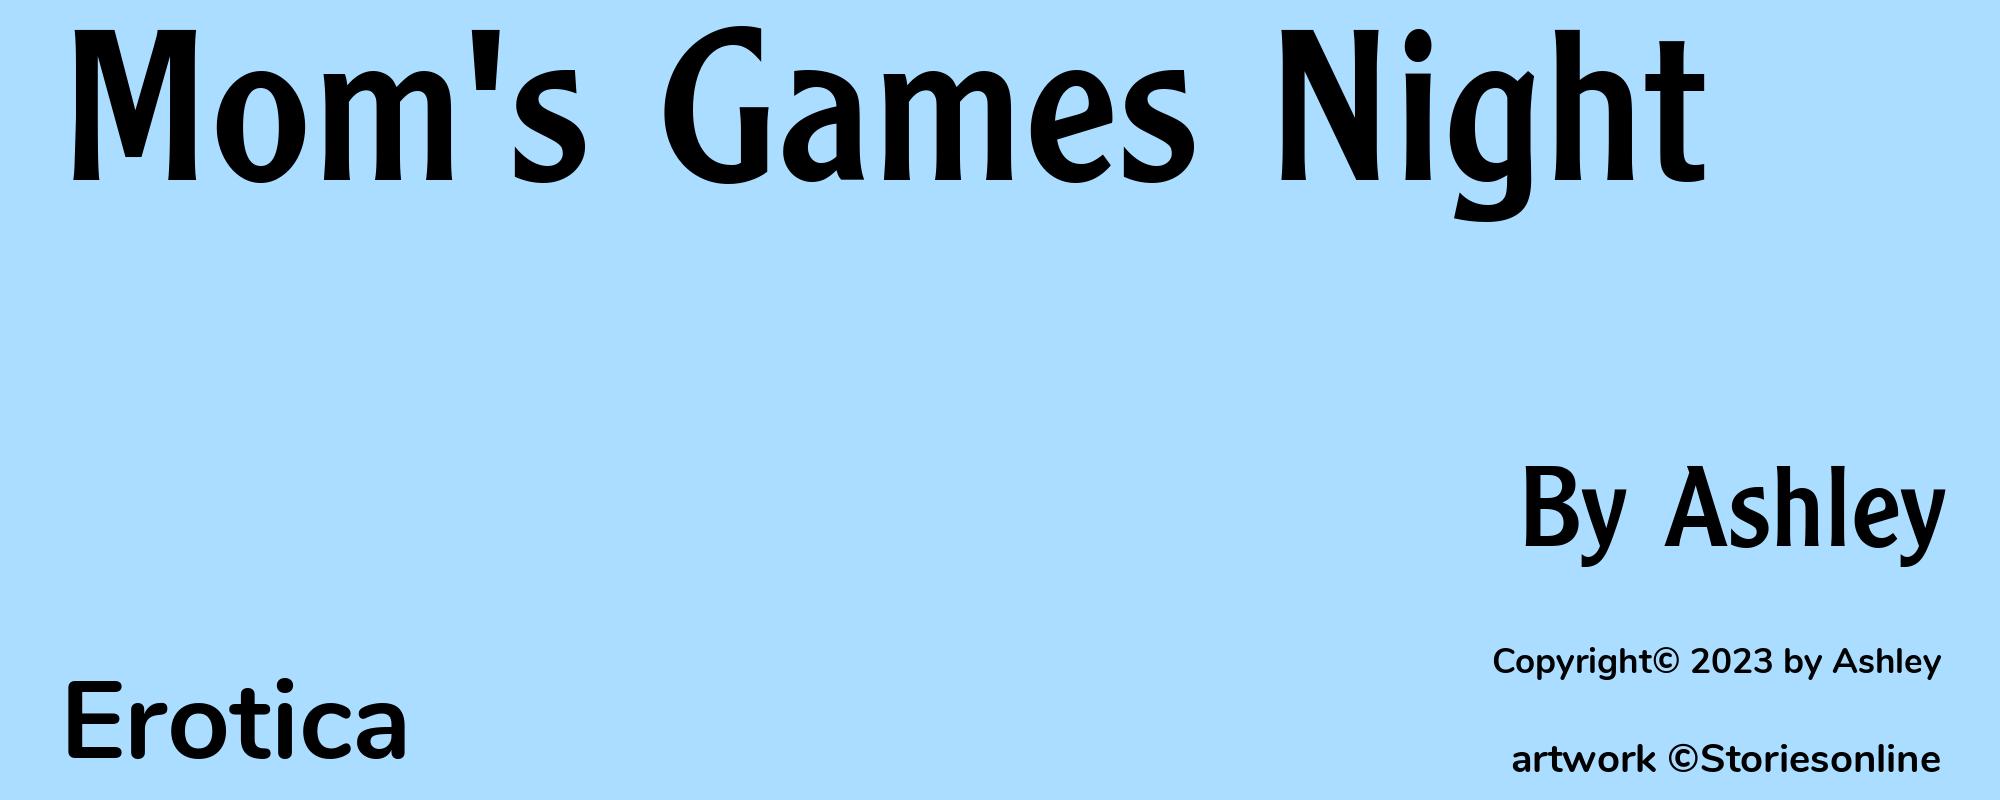 Mom's Games Night - Cover